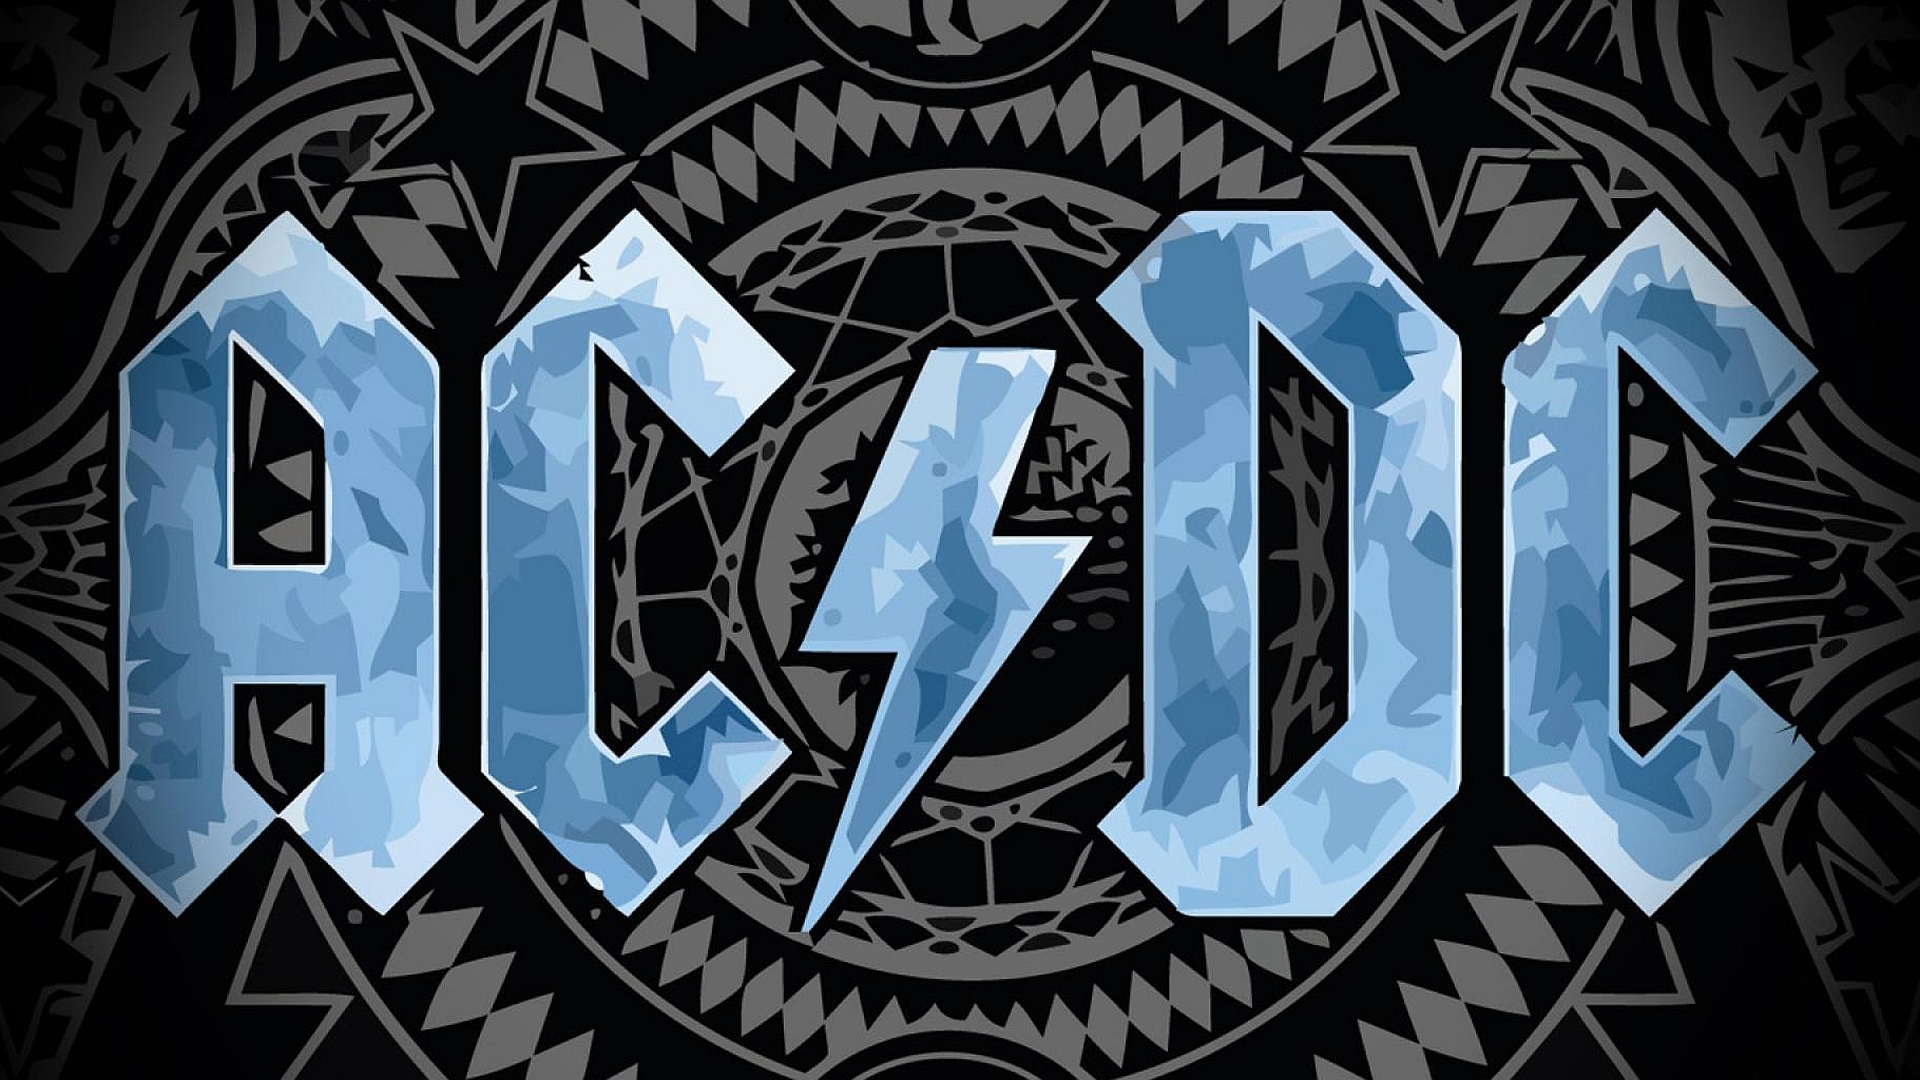 Ac Dc Wallpapers